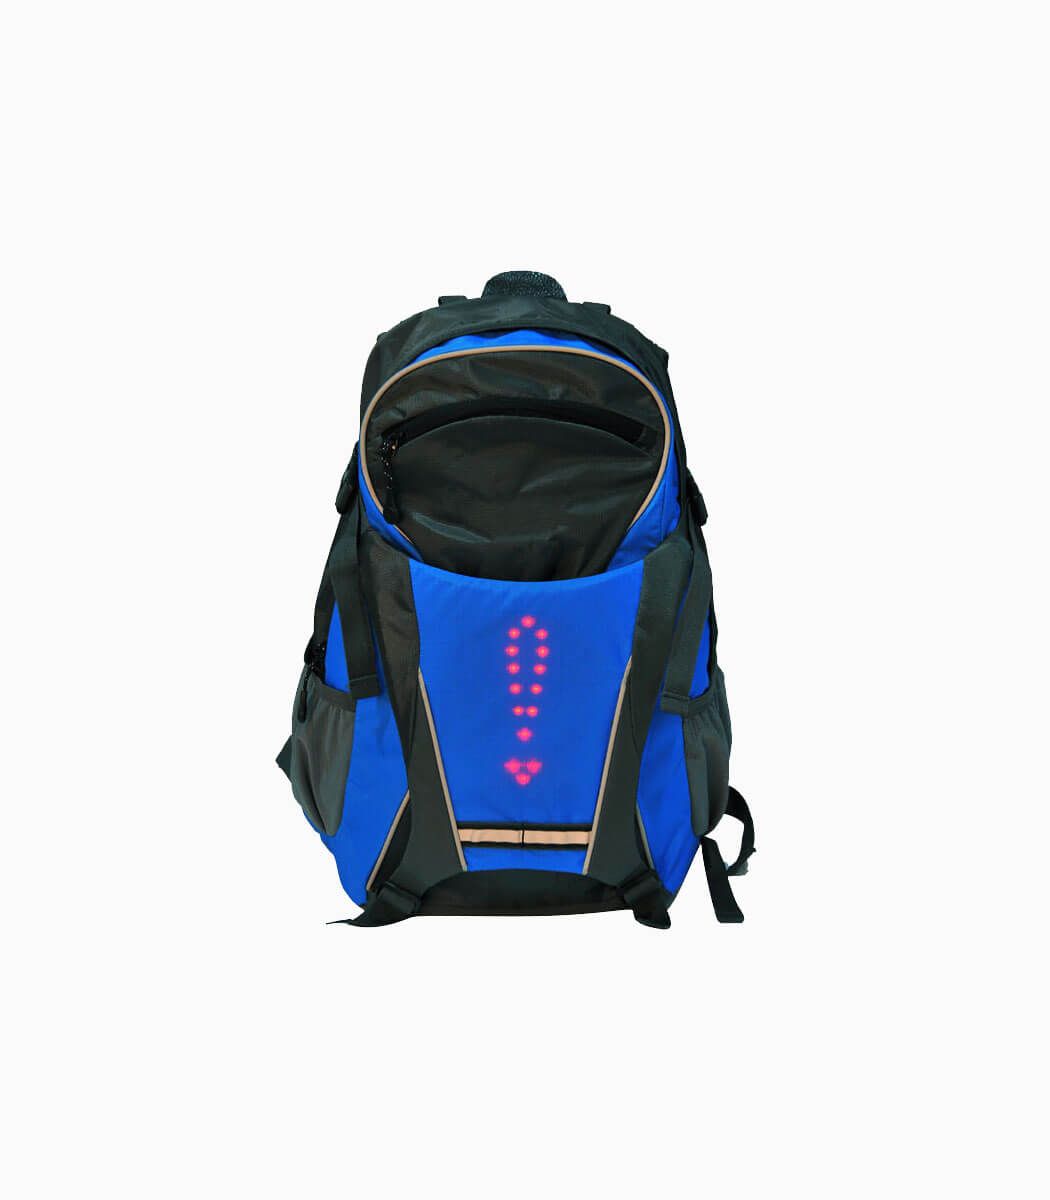 LIGHT ARMOR BP+ (BLUE) cycling backpack with signal lights front with brake light